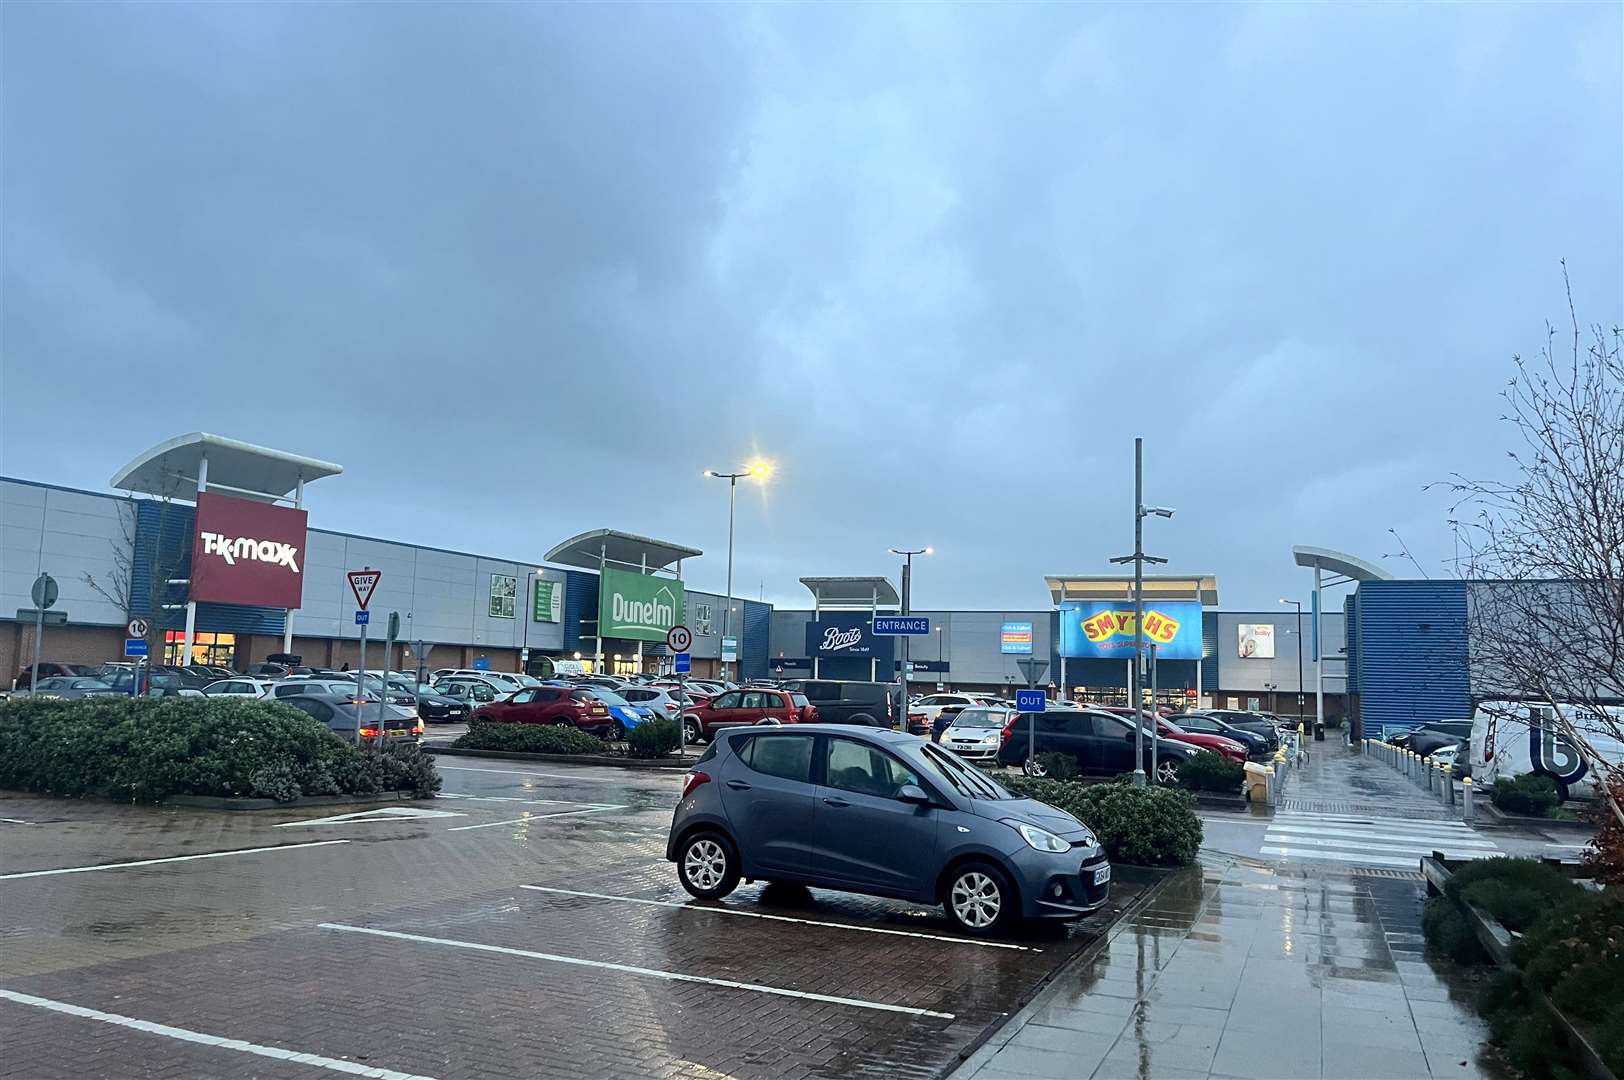 If the plans are approved and Iceland opens all the units in Ashford Retail Park would be filled